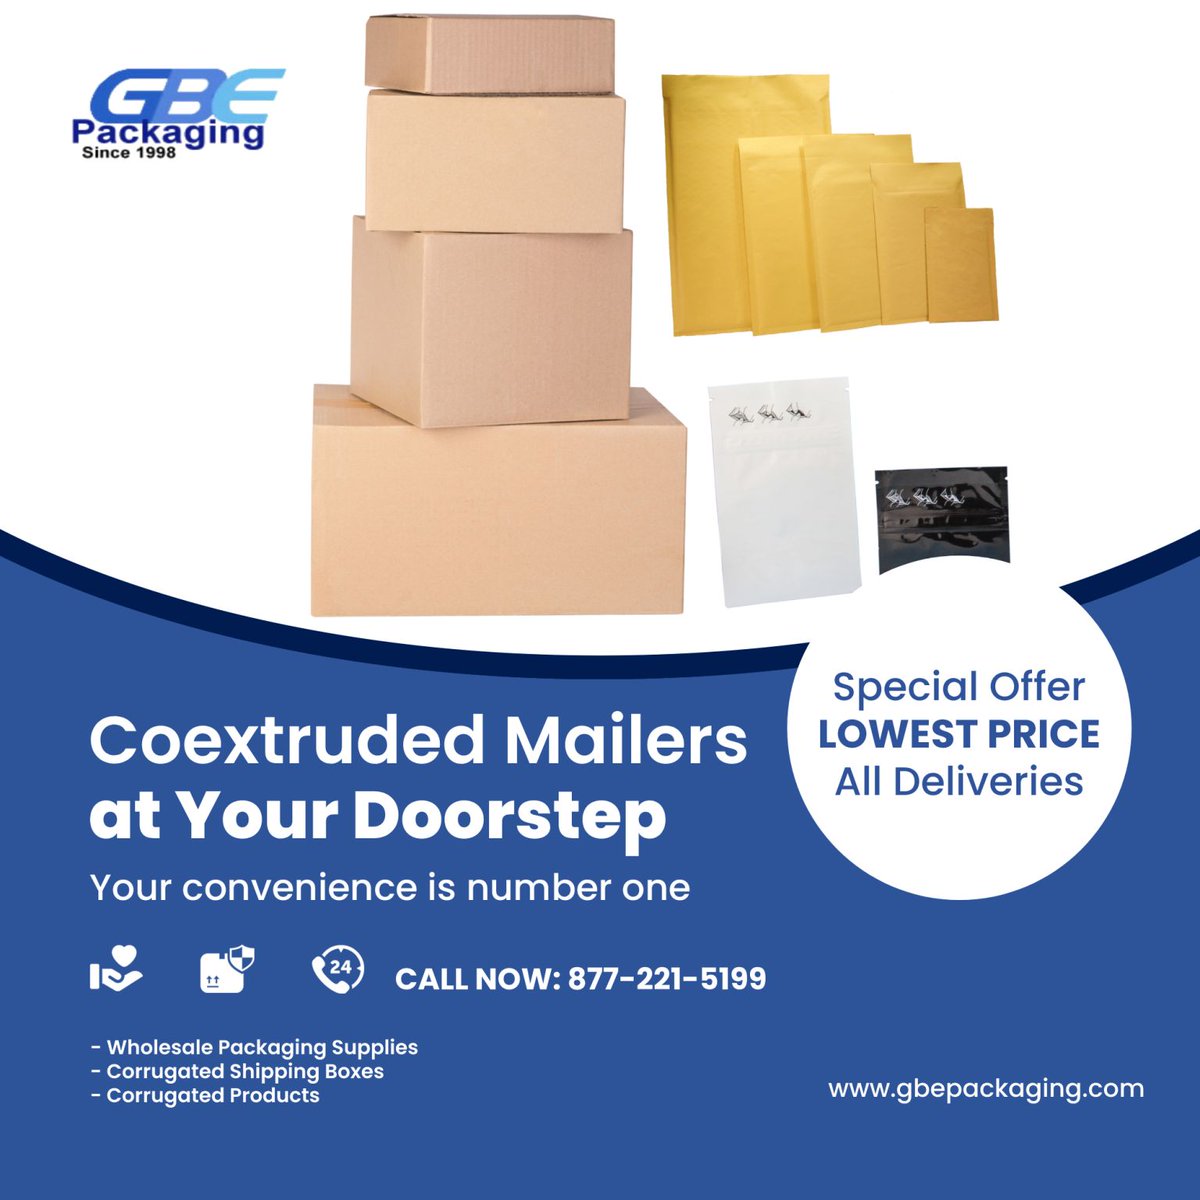 Running low on supplies? Stock up with GBE Packaging and never miss a beat!

Quality Since 1998 | gbepackaging.com

#packaging #economical #LowPrice #PackagingForAll #cheap #wholesale #ecommerce #PackagingInnovation #GBEPackaging #PartnersInSuccess